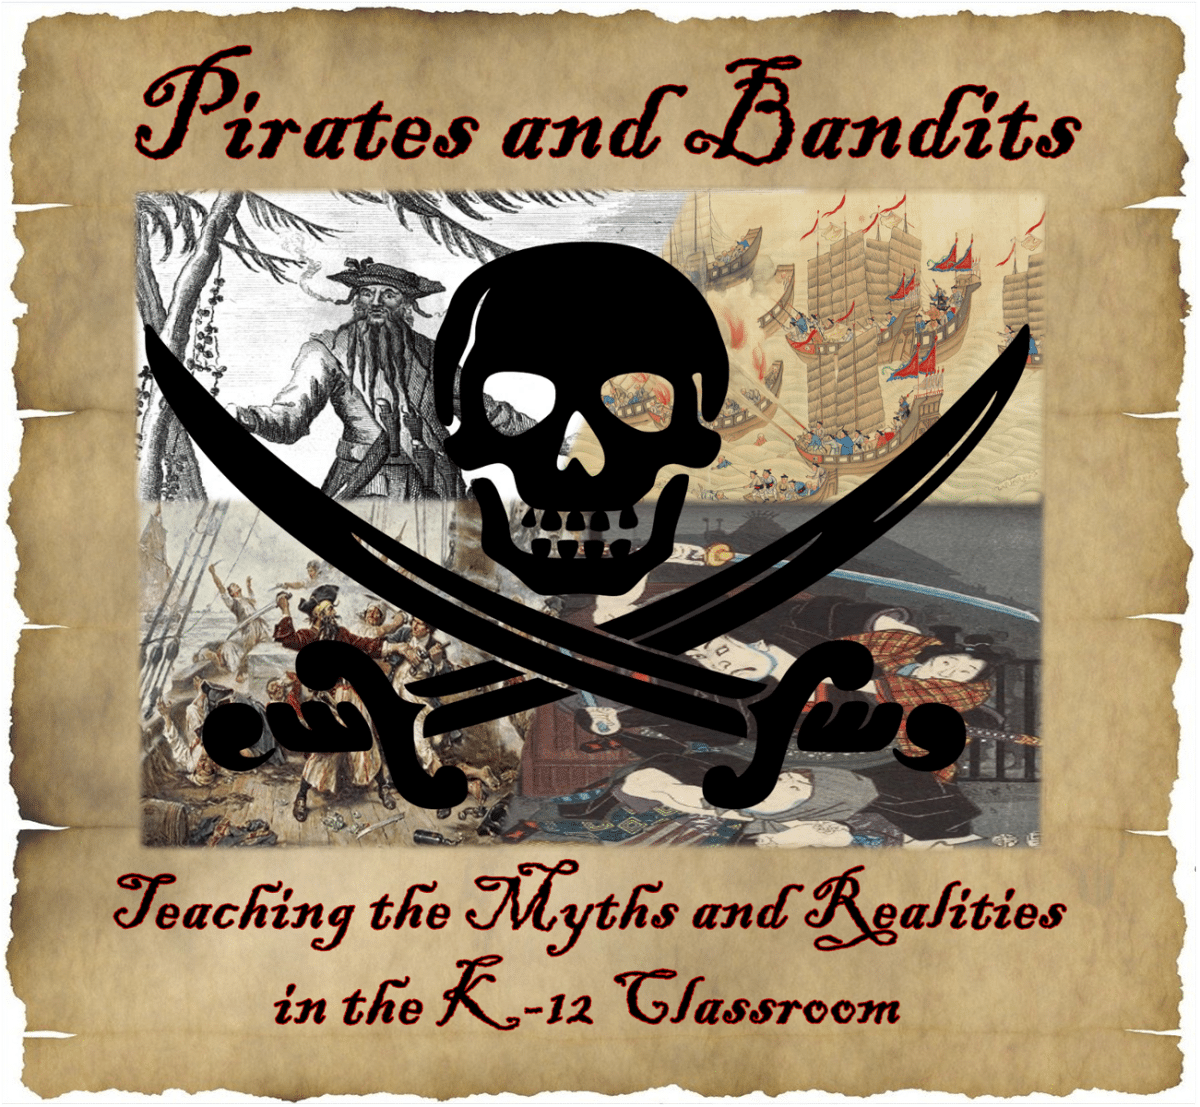 Pirates and Bandits: Teaching the Myths and Realities in the K-12 Classroom